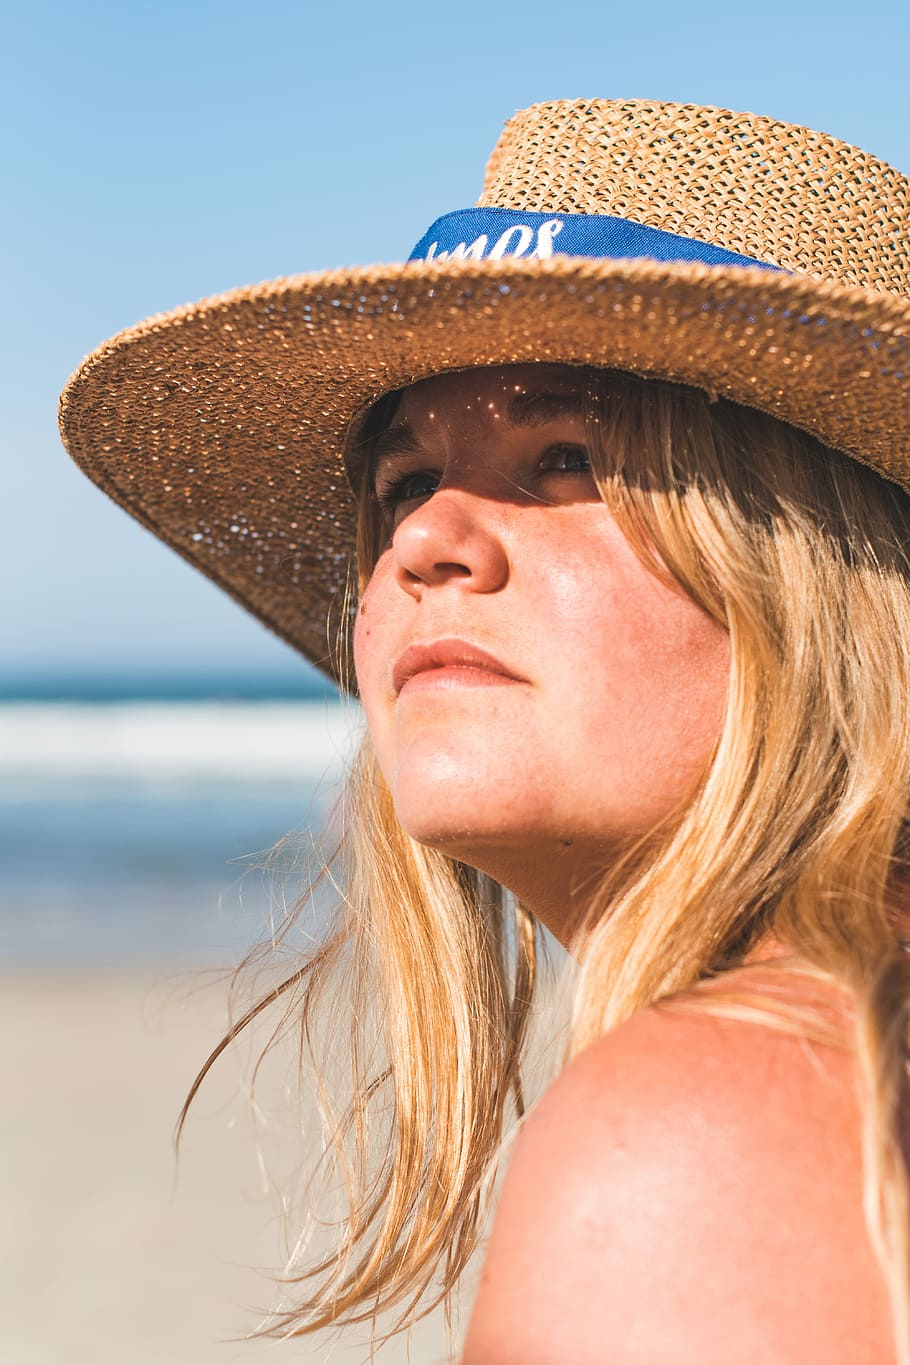 close-up photo of woman wearing brown wicker sun hat near beach during daytime